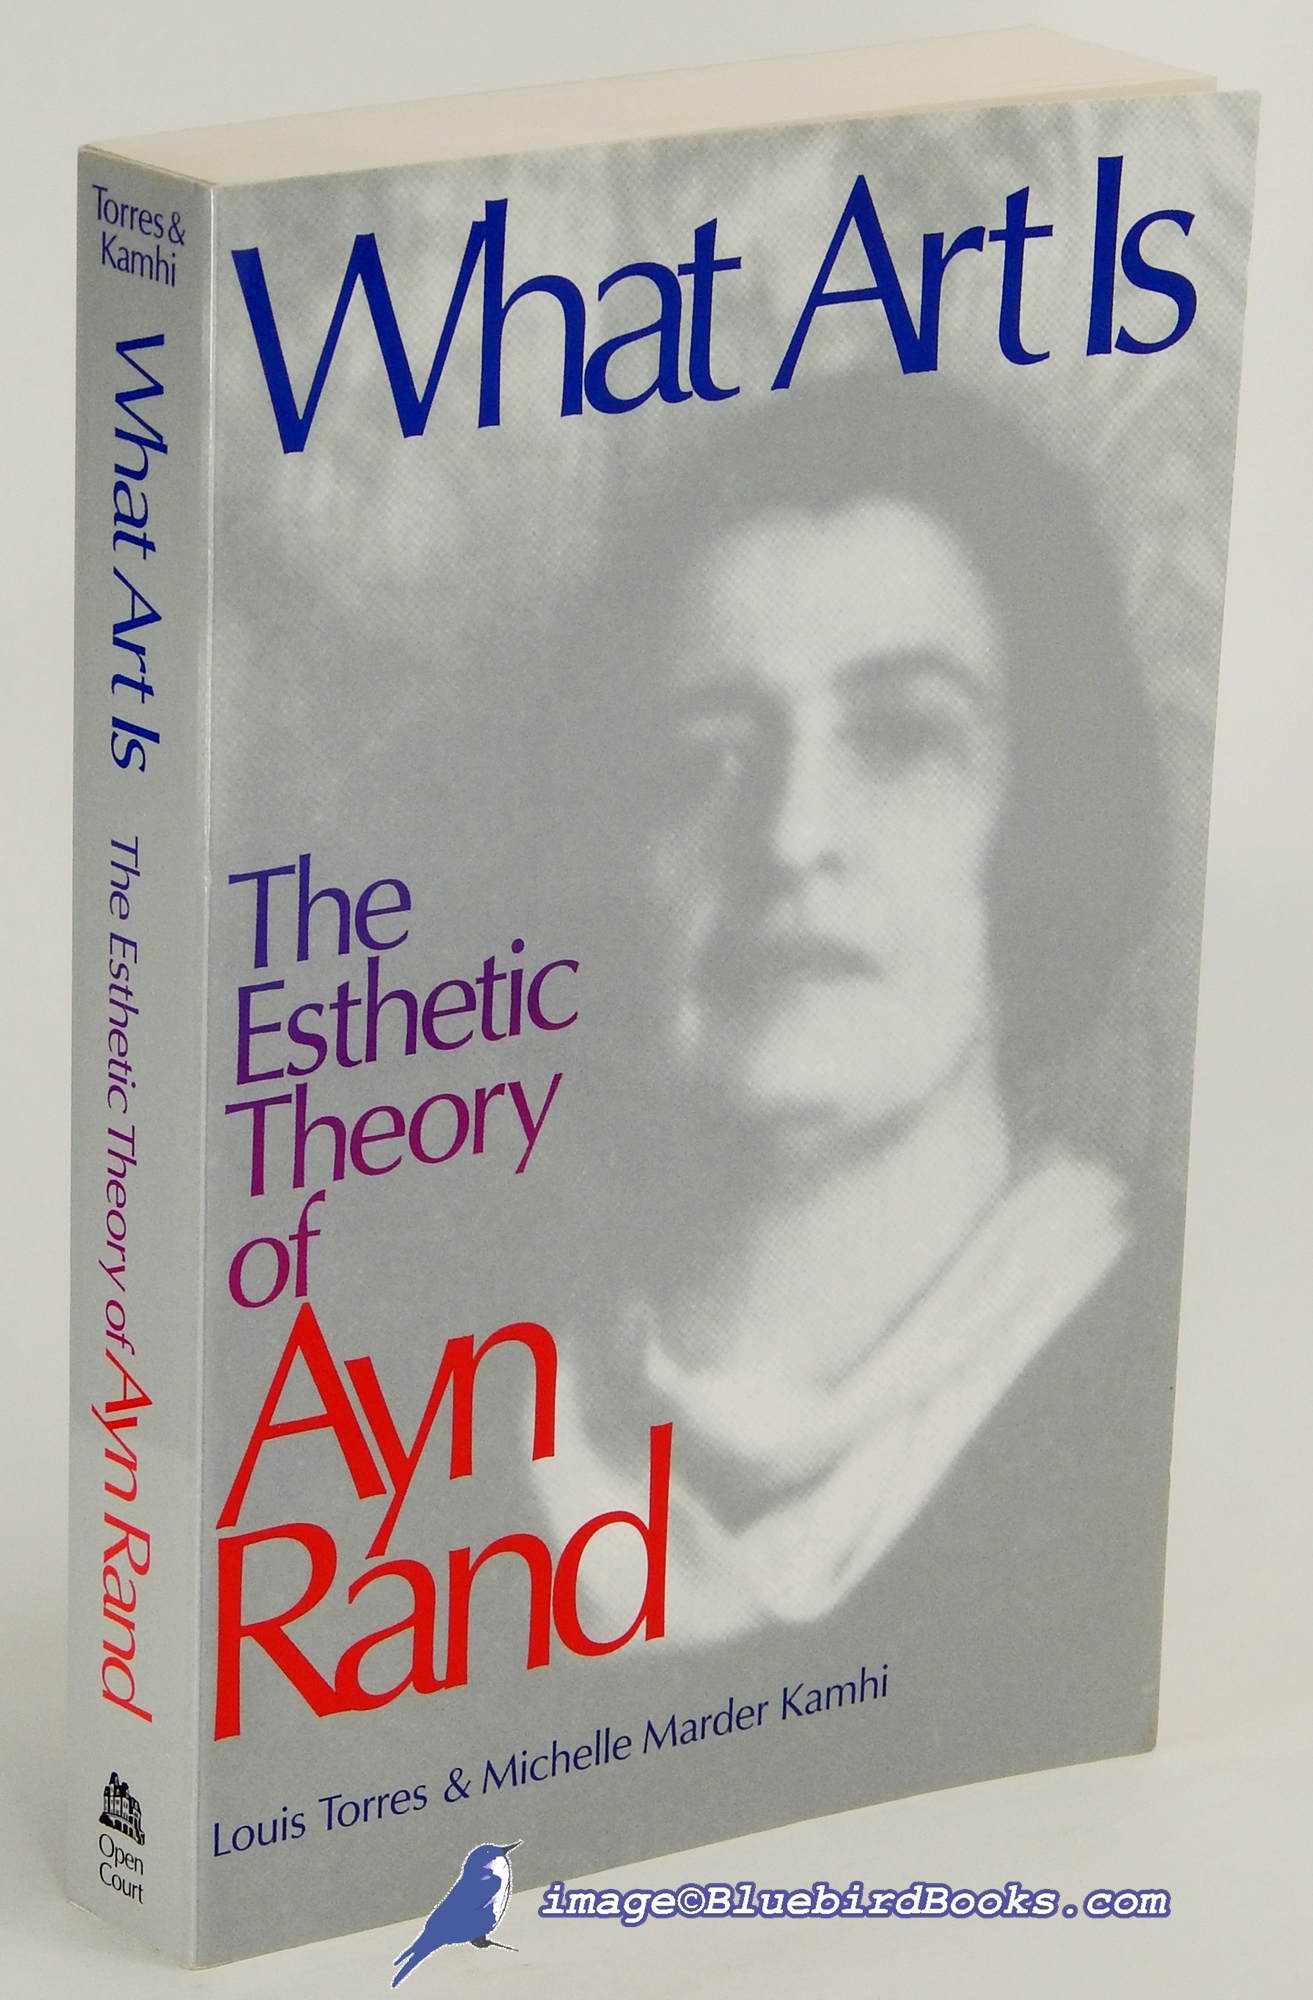 TORRES, LOUIS; KAMHI, MICHELLE MARDER - What Art Is: The Esthetic Theory of Ayn Rand